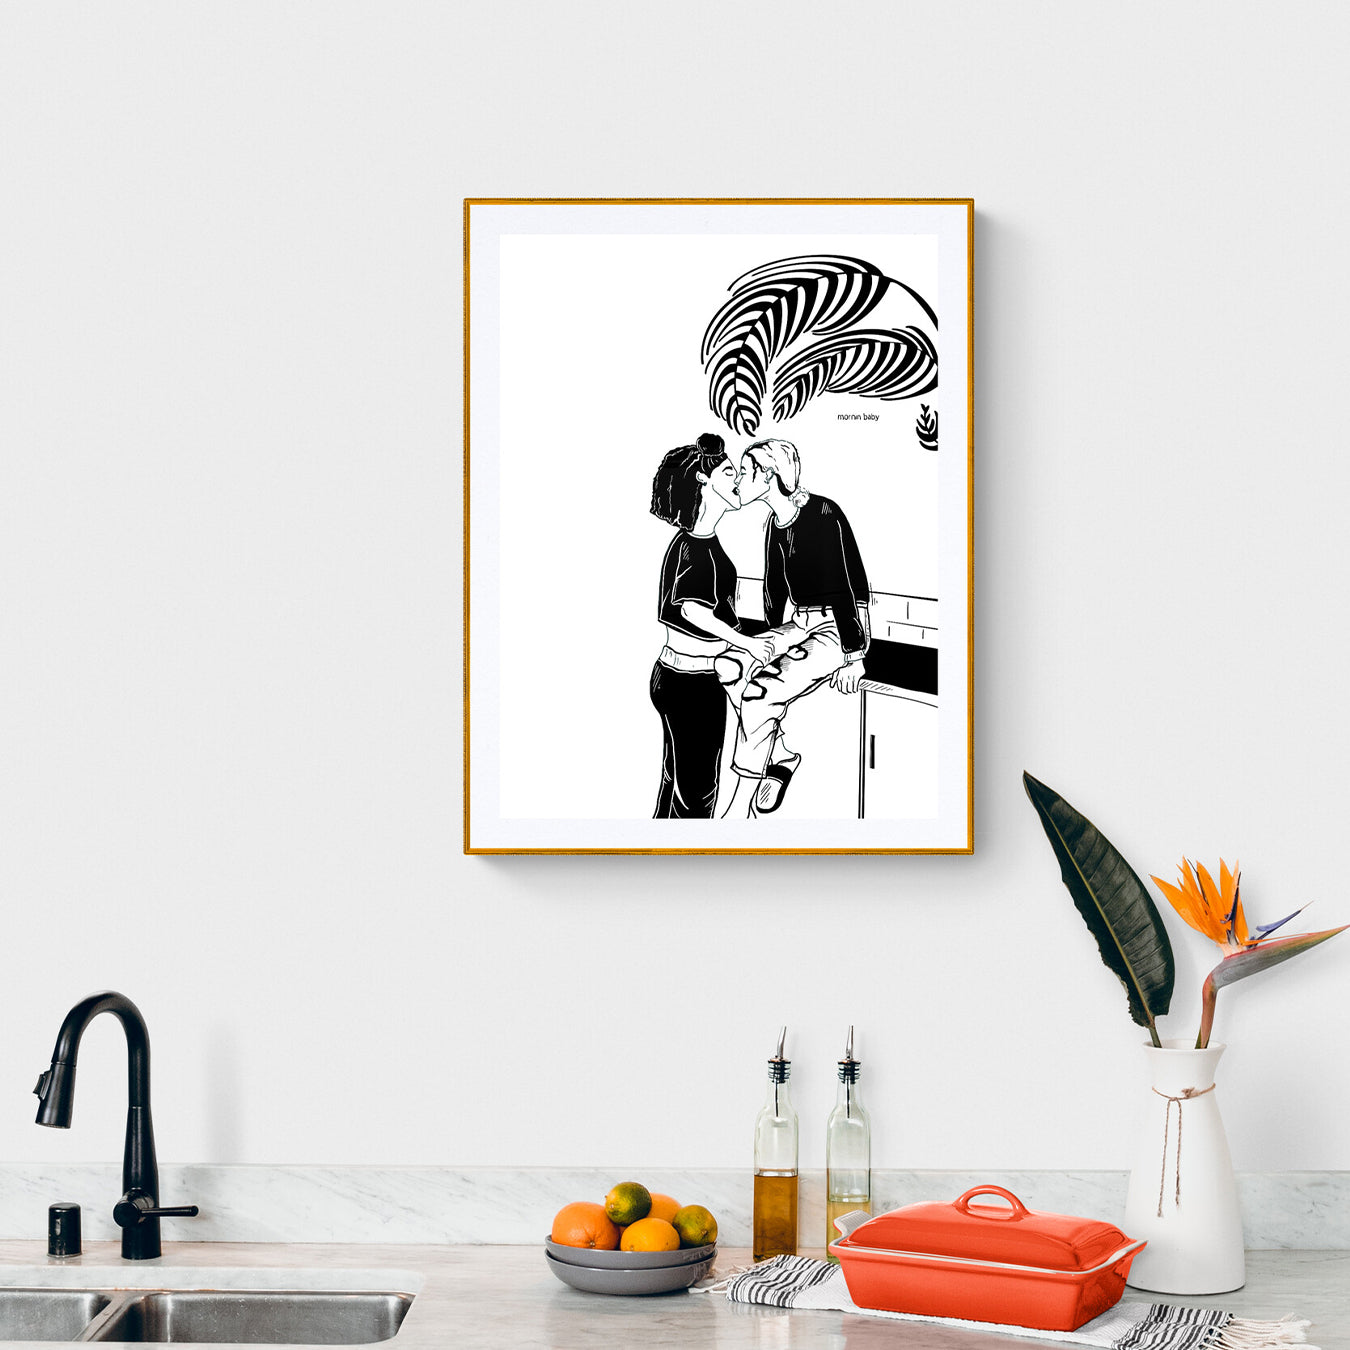 Courtney L Ellis Illustrations Art print by LGBTQ+ Illustration Artist Courtney Ellis. Wall art home decor and gifts. Lesbian couple kissing each other and saying good morning. Black and white art.